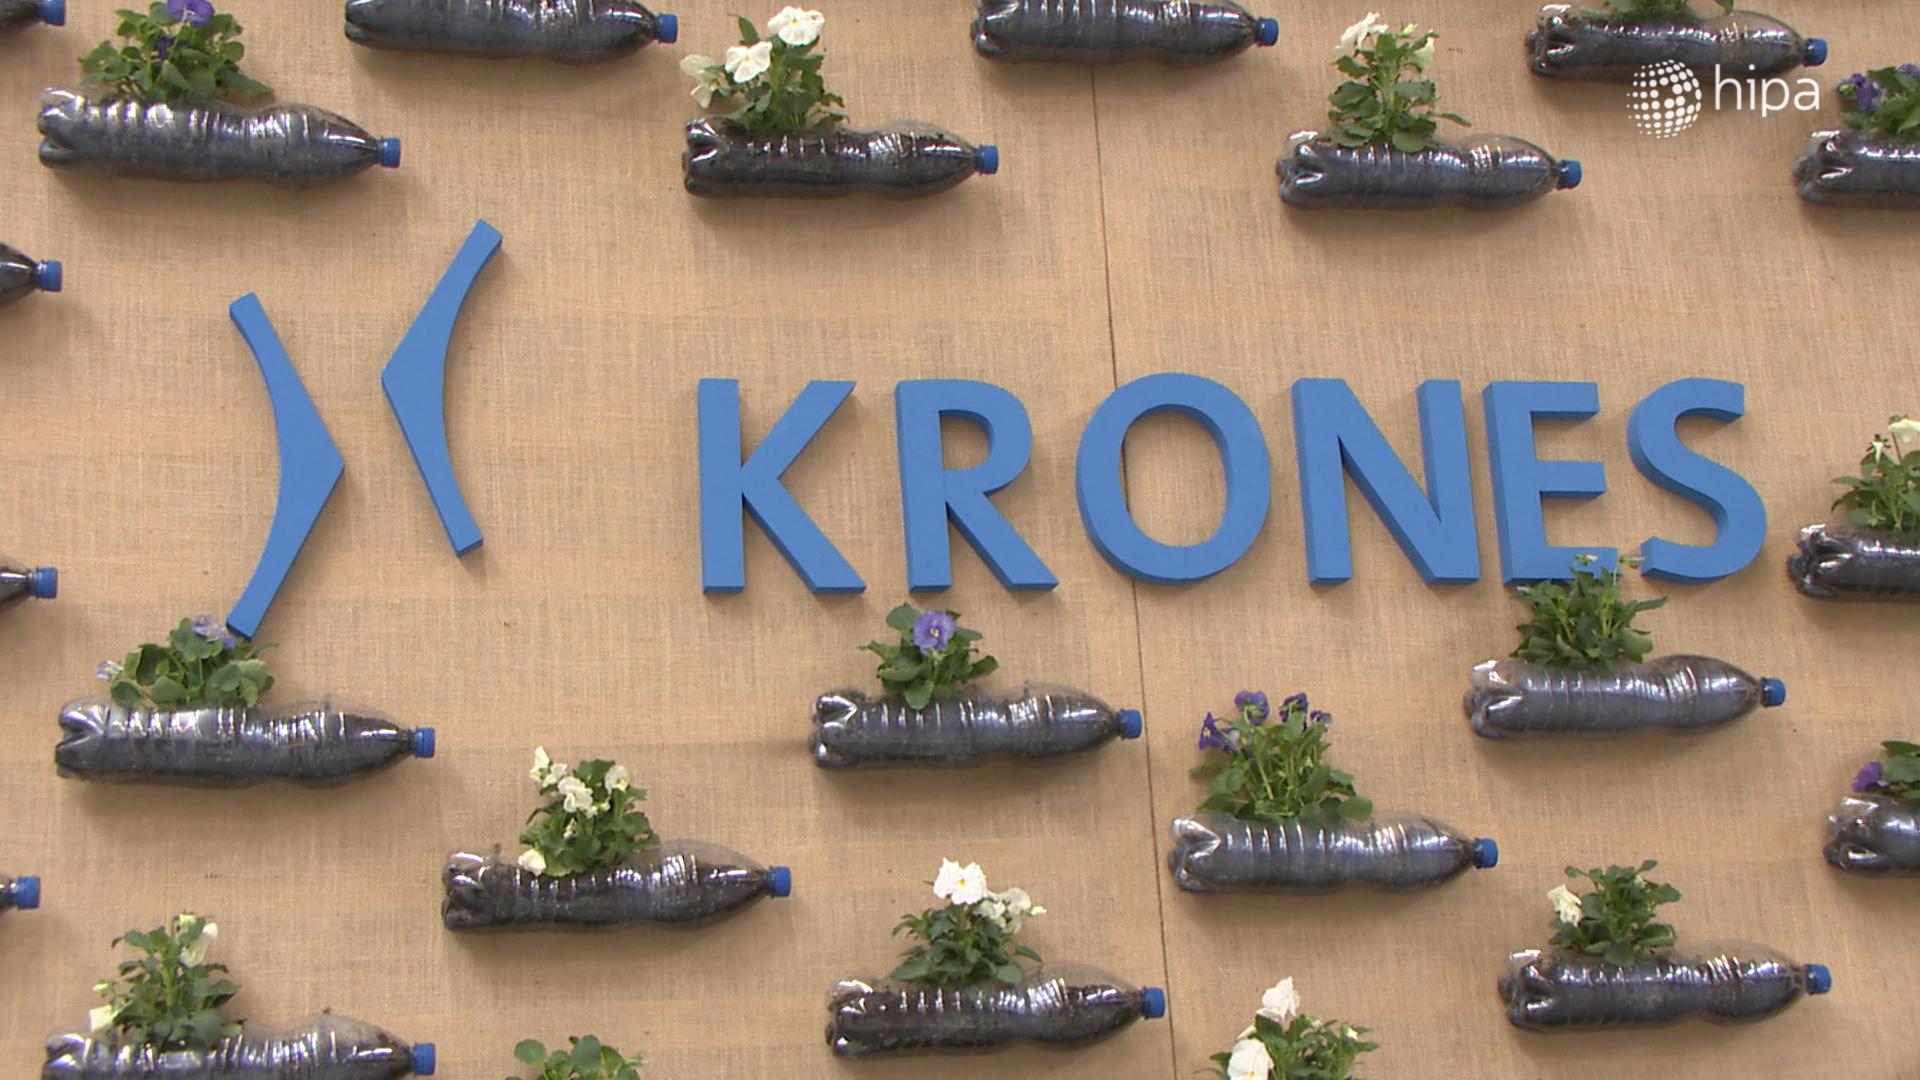 Krones' first plant outside Germany is now complete in Debrecen